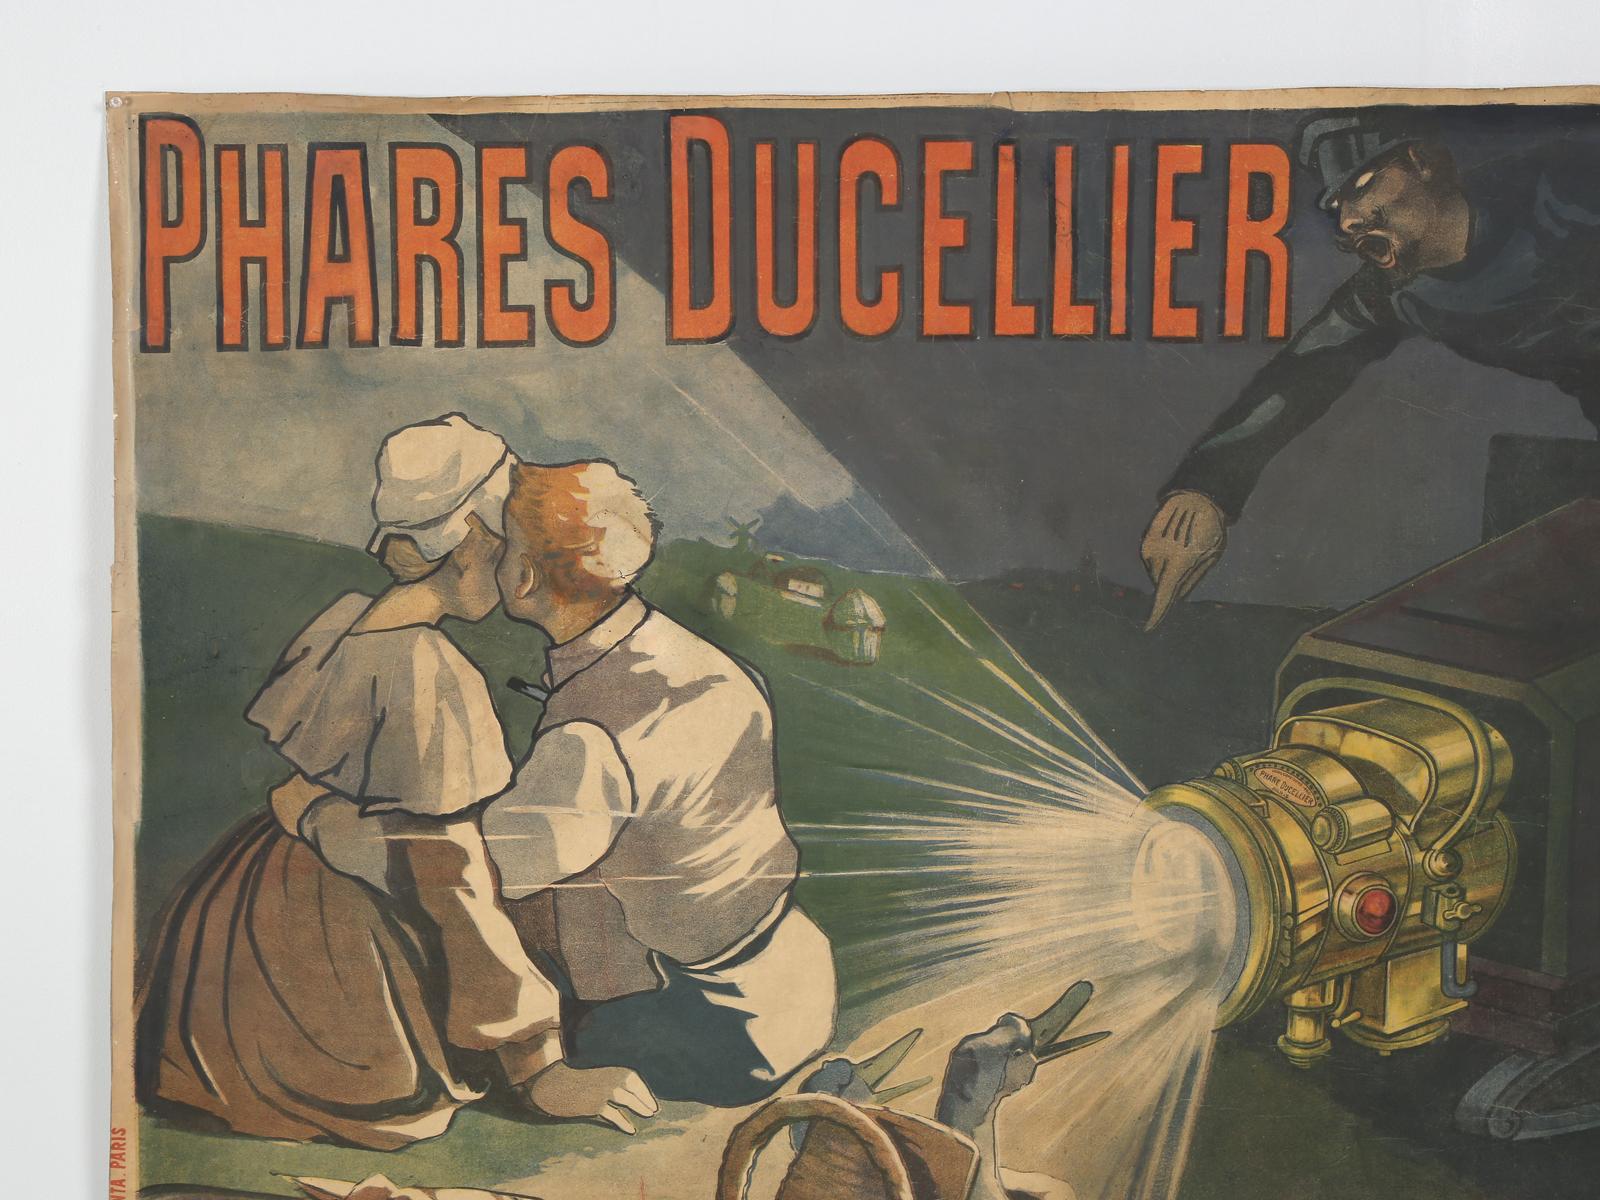 Philippe Chappelier was a very talented caricaturist, with a great sense of humor and designed a handful of truly exceptional posters. In this Art Nouveau turn-of-the-century poster, he paints a car driving in the countryside, surprising an